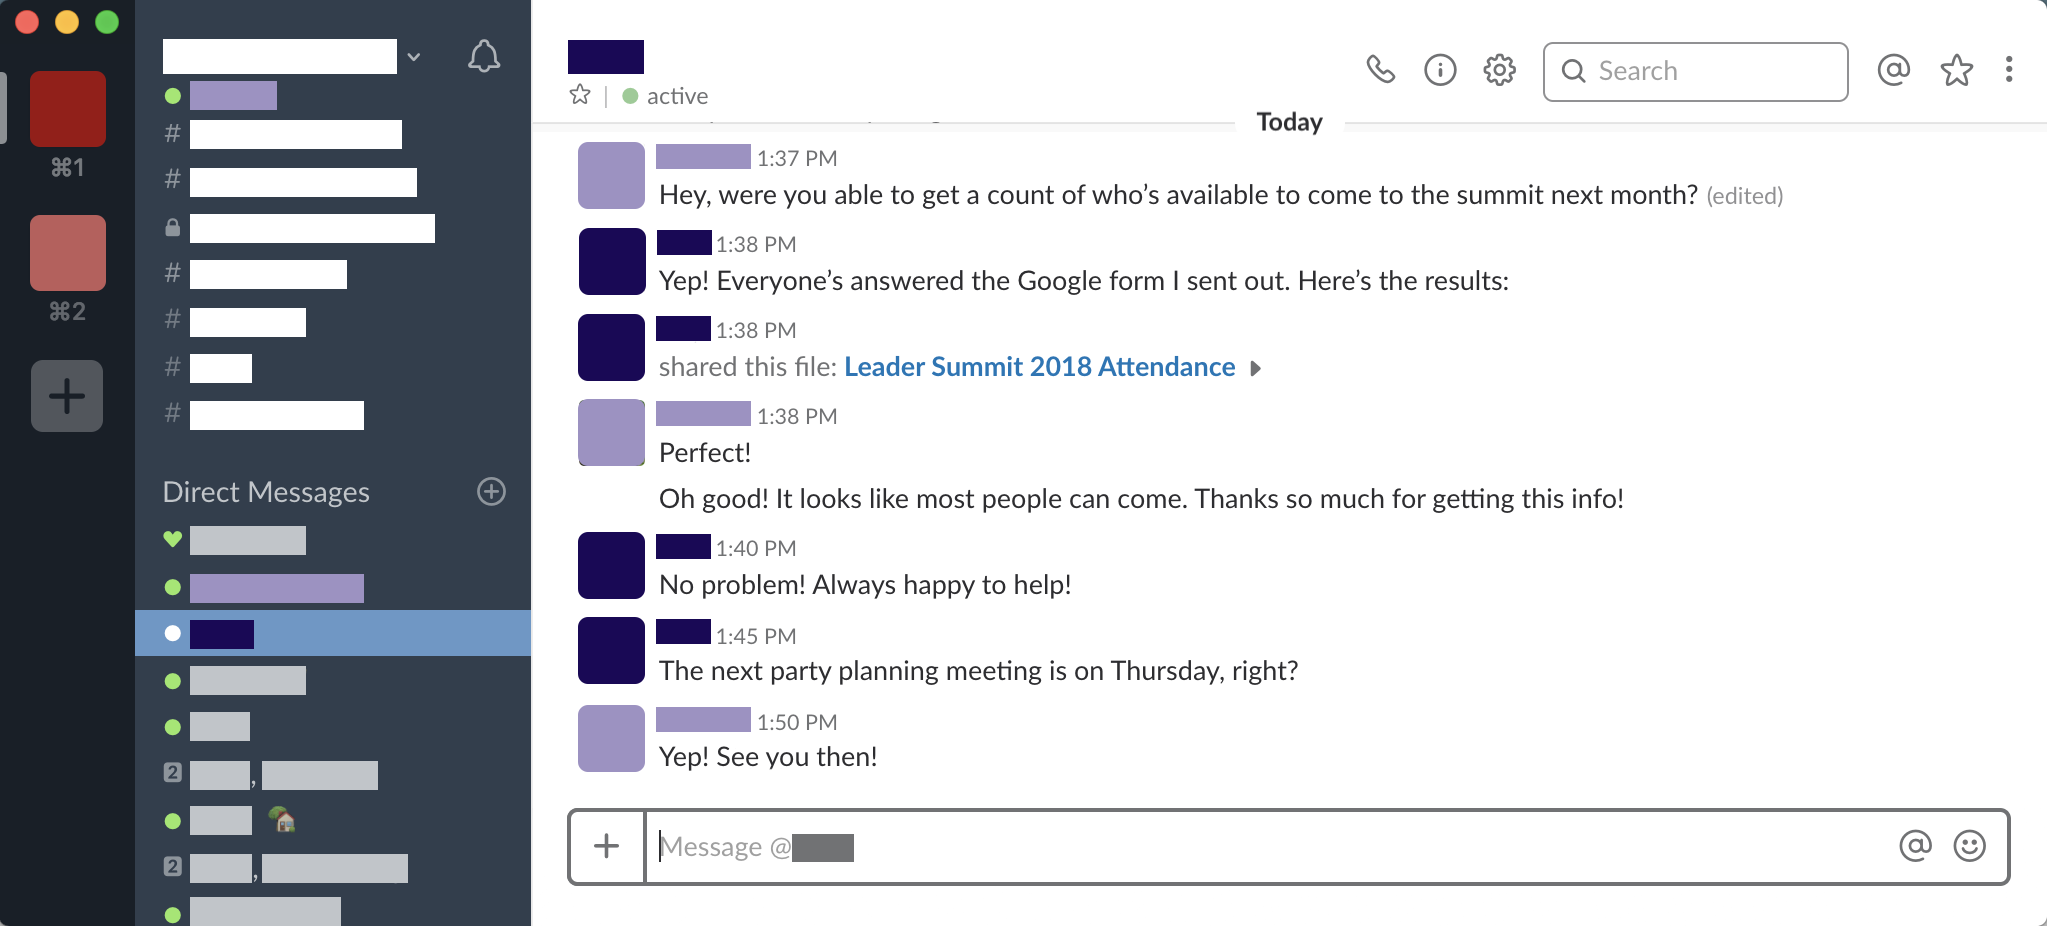 Screenshot of an online chat conversation between two coworkers discussing an upcoming event. Coworker 1: Hey were you able to get a count of who's available to come to the summit next month? Coworker 2: Yep! Everyone'es answered the Google form I sent out. Here's the results (file is shared). Coworker 1: Perfect! Oh good! It looks like most people can come. Thanks so much for getting this info! Coworker 2: No problem! Always happy to help. The next party planning meeting is on Thursday, right? Coworker 1: Yep! See you then!